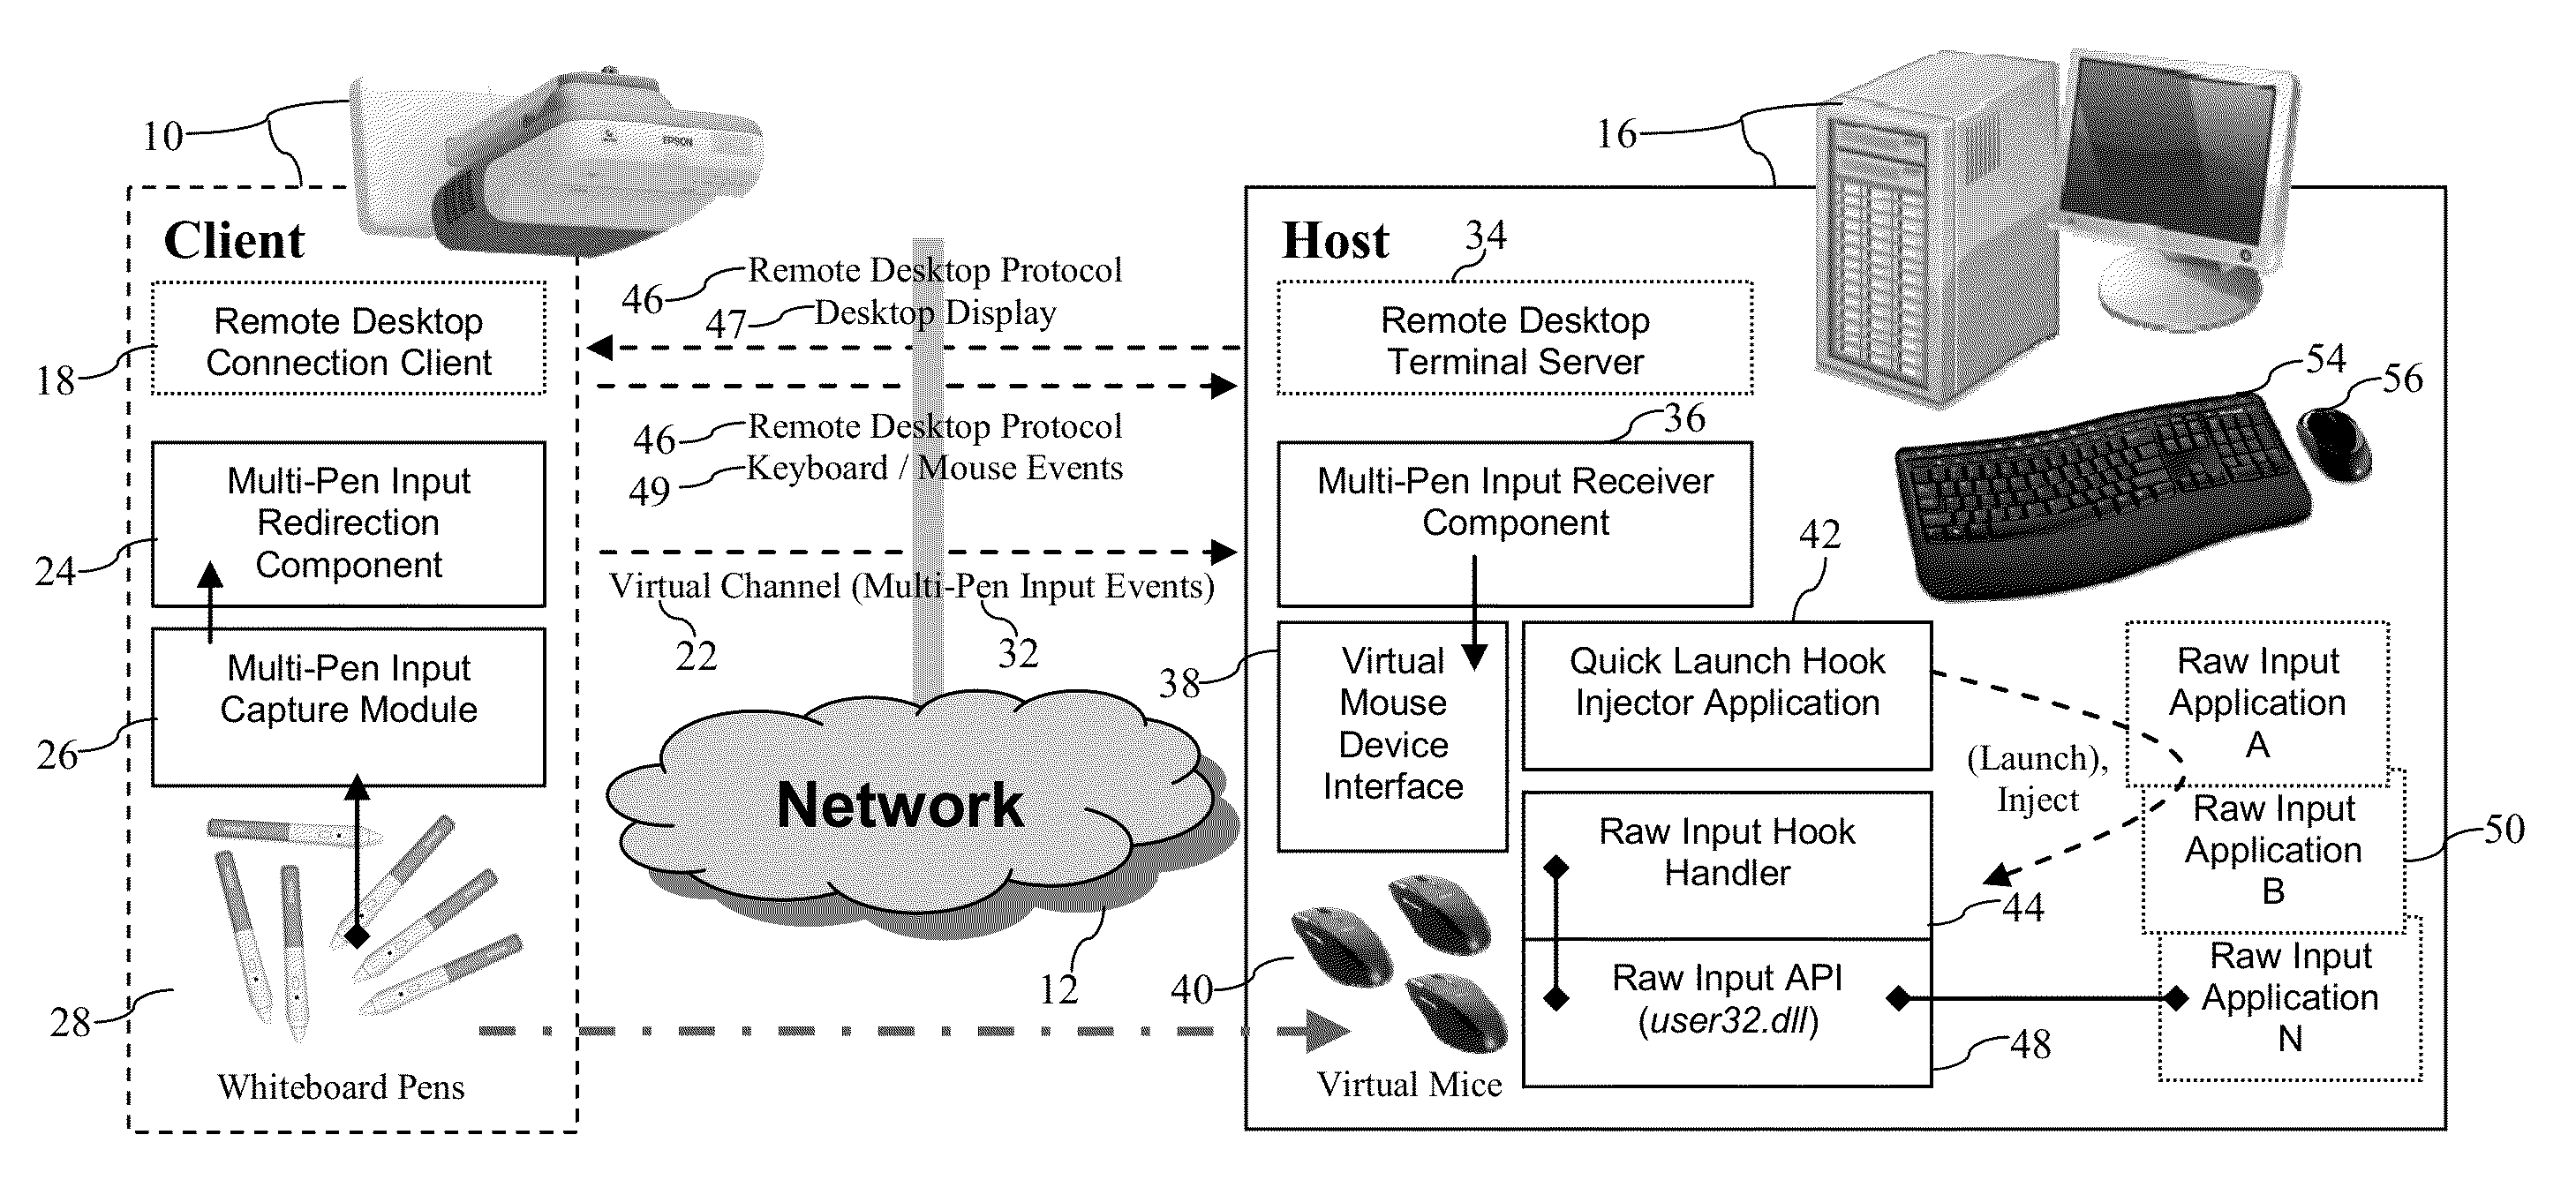 Method for providing multiple mouse inputs in a remote desktop session